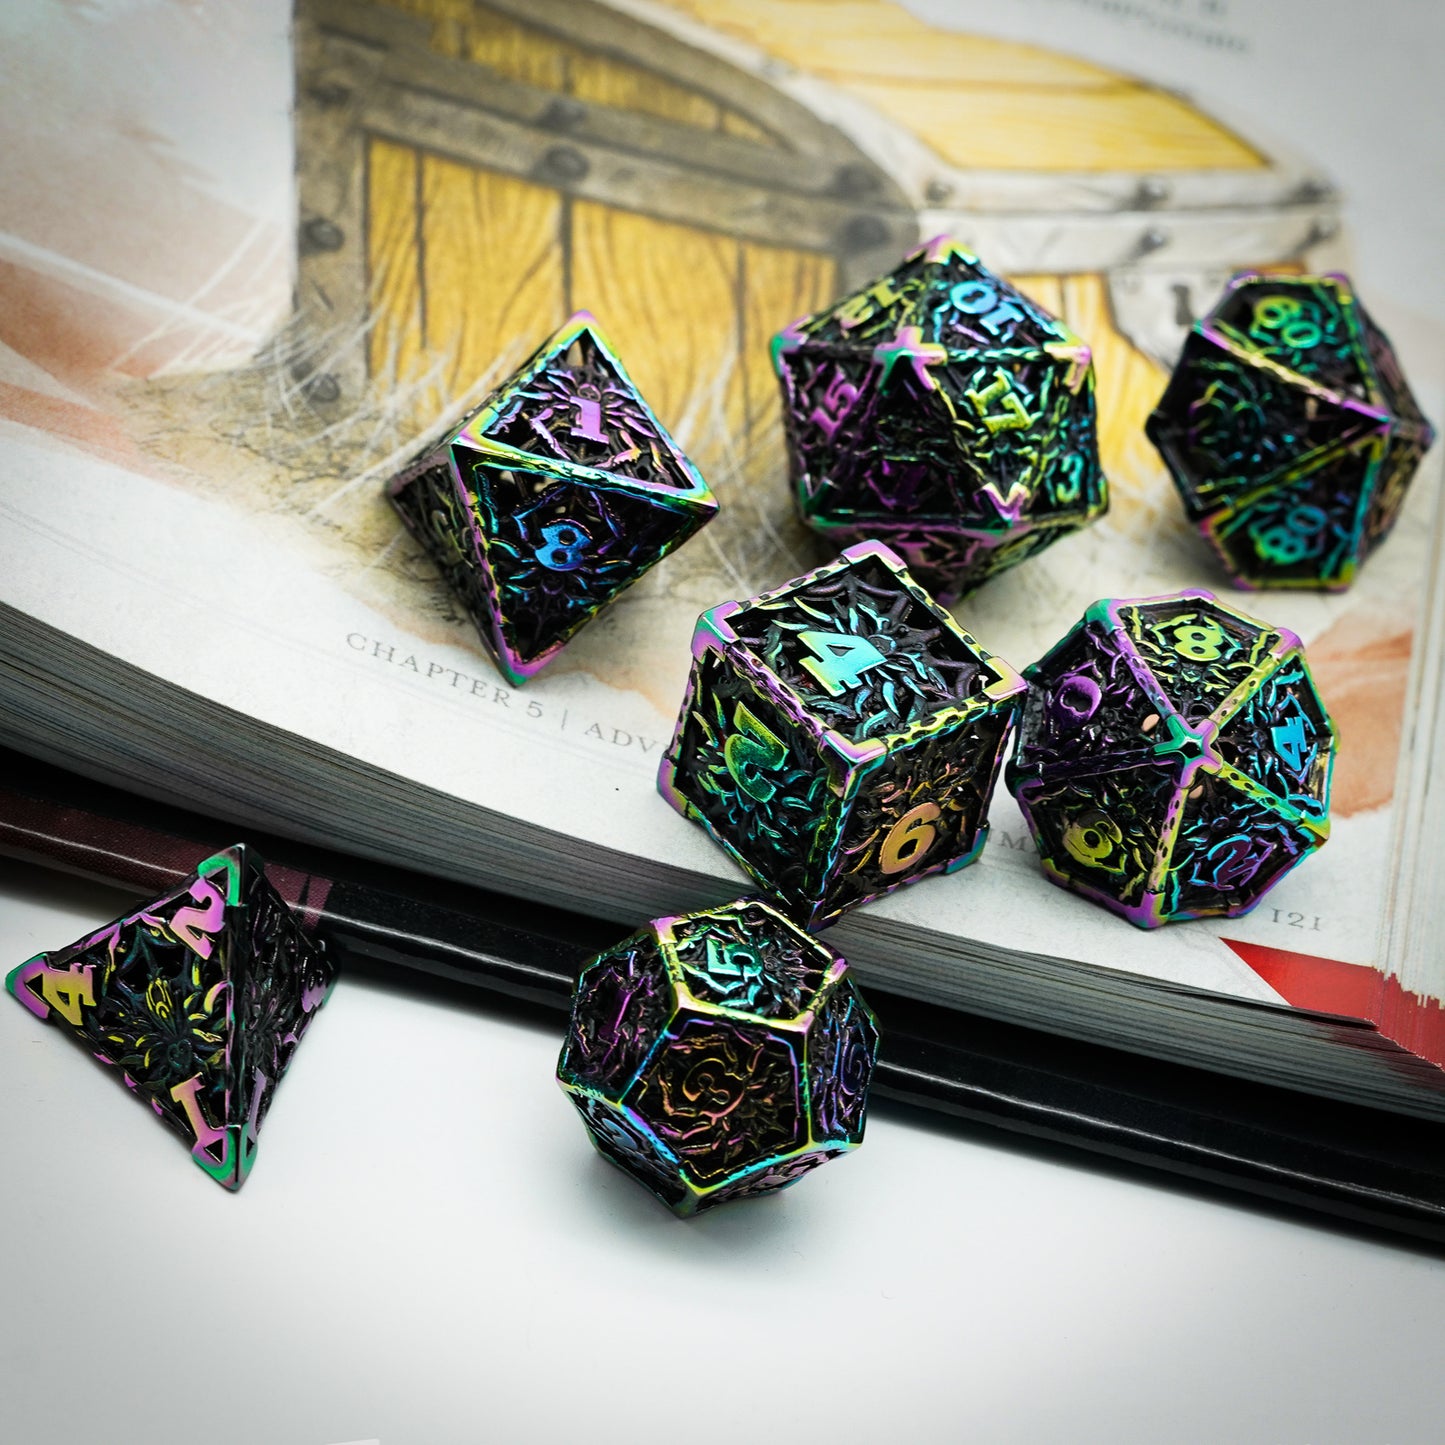 multicolored 7 piece dice set on reference book background